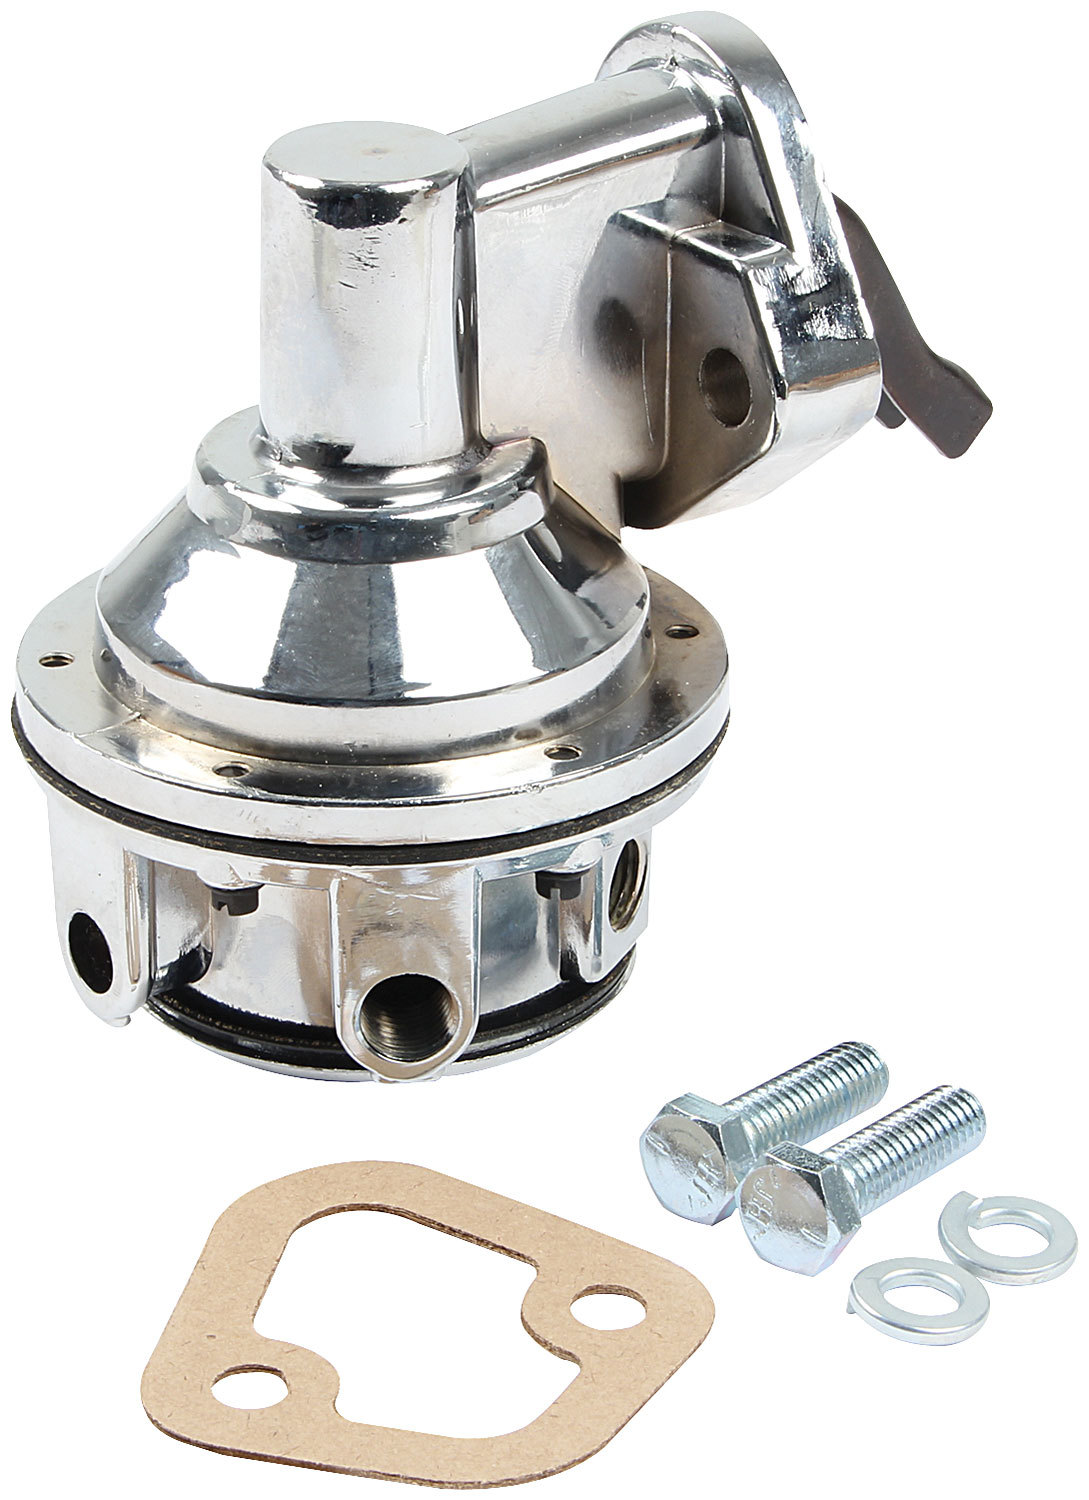 Fuel Pump - Mechanical - 80 gph - 6.5-8 psi - 1/4 in NPT Female Inlet / Outlet - Aluminum - Polished - Gas - Small Block Chevy - Each